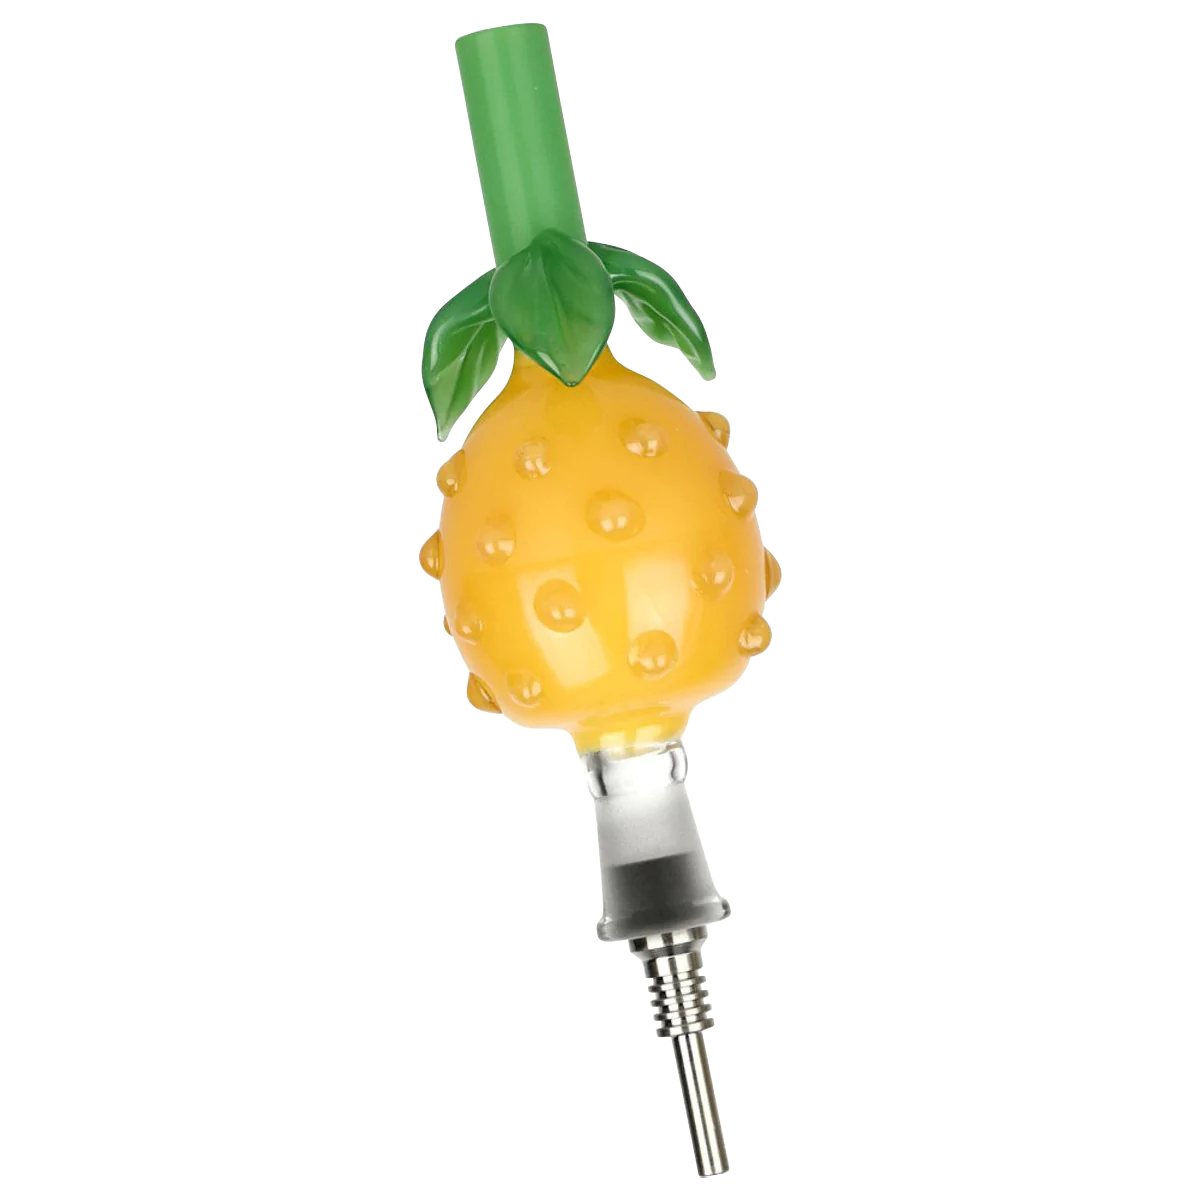 Perky Pineapple Glass Honey Straw with Titanium Tip, 6" size, angled view on striped background